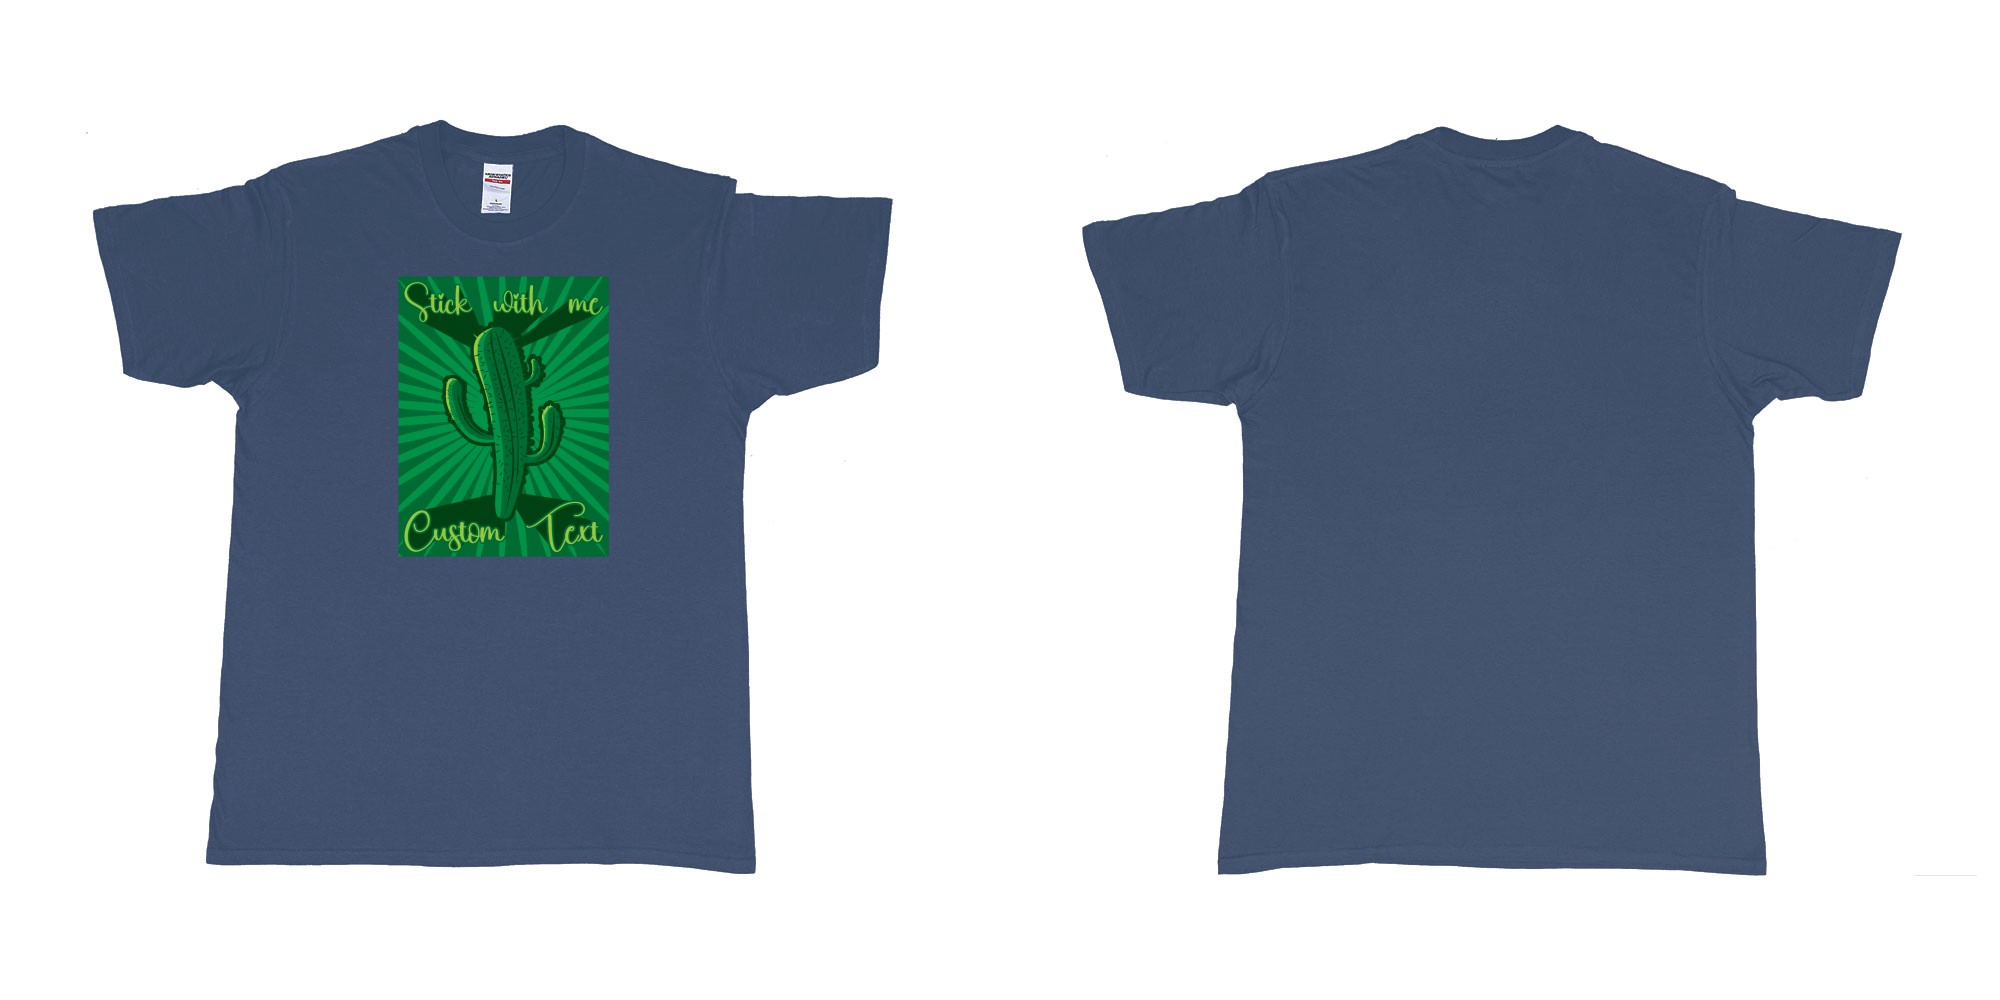 Custom tshirt design cactus stick with me in fabric color navy choice your own text made in Bali by The Pirate Way